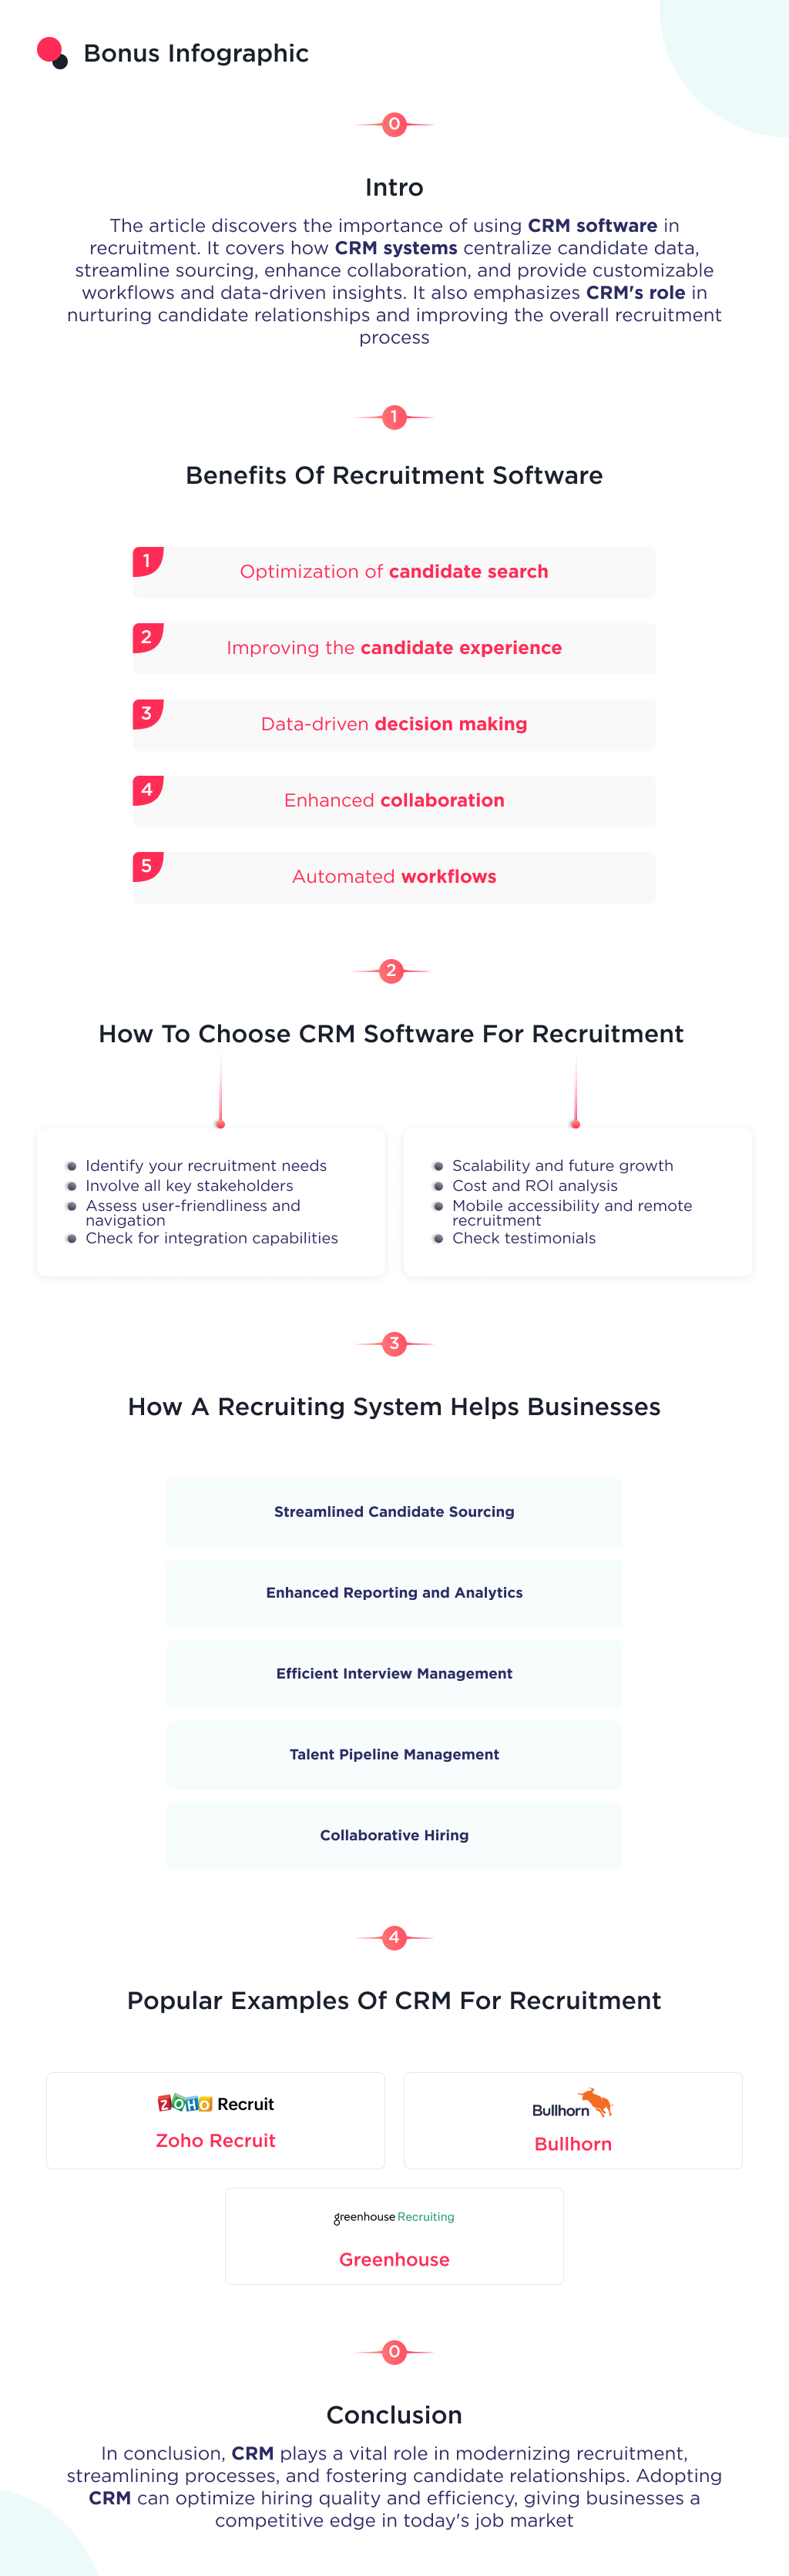 the image shows a bonus infographic to the article named "CRM for Recruiting: Why Your Business Needs It"